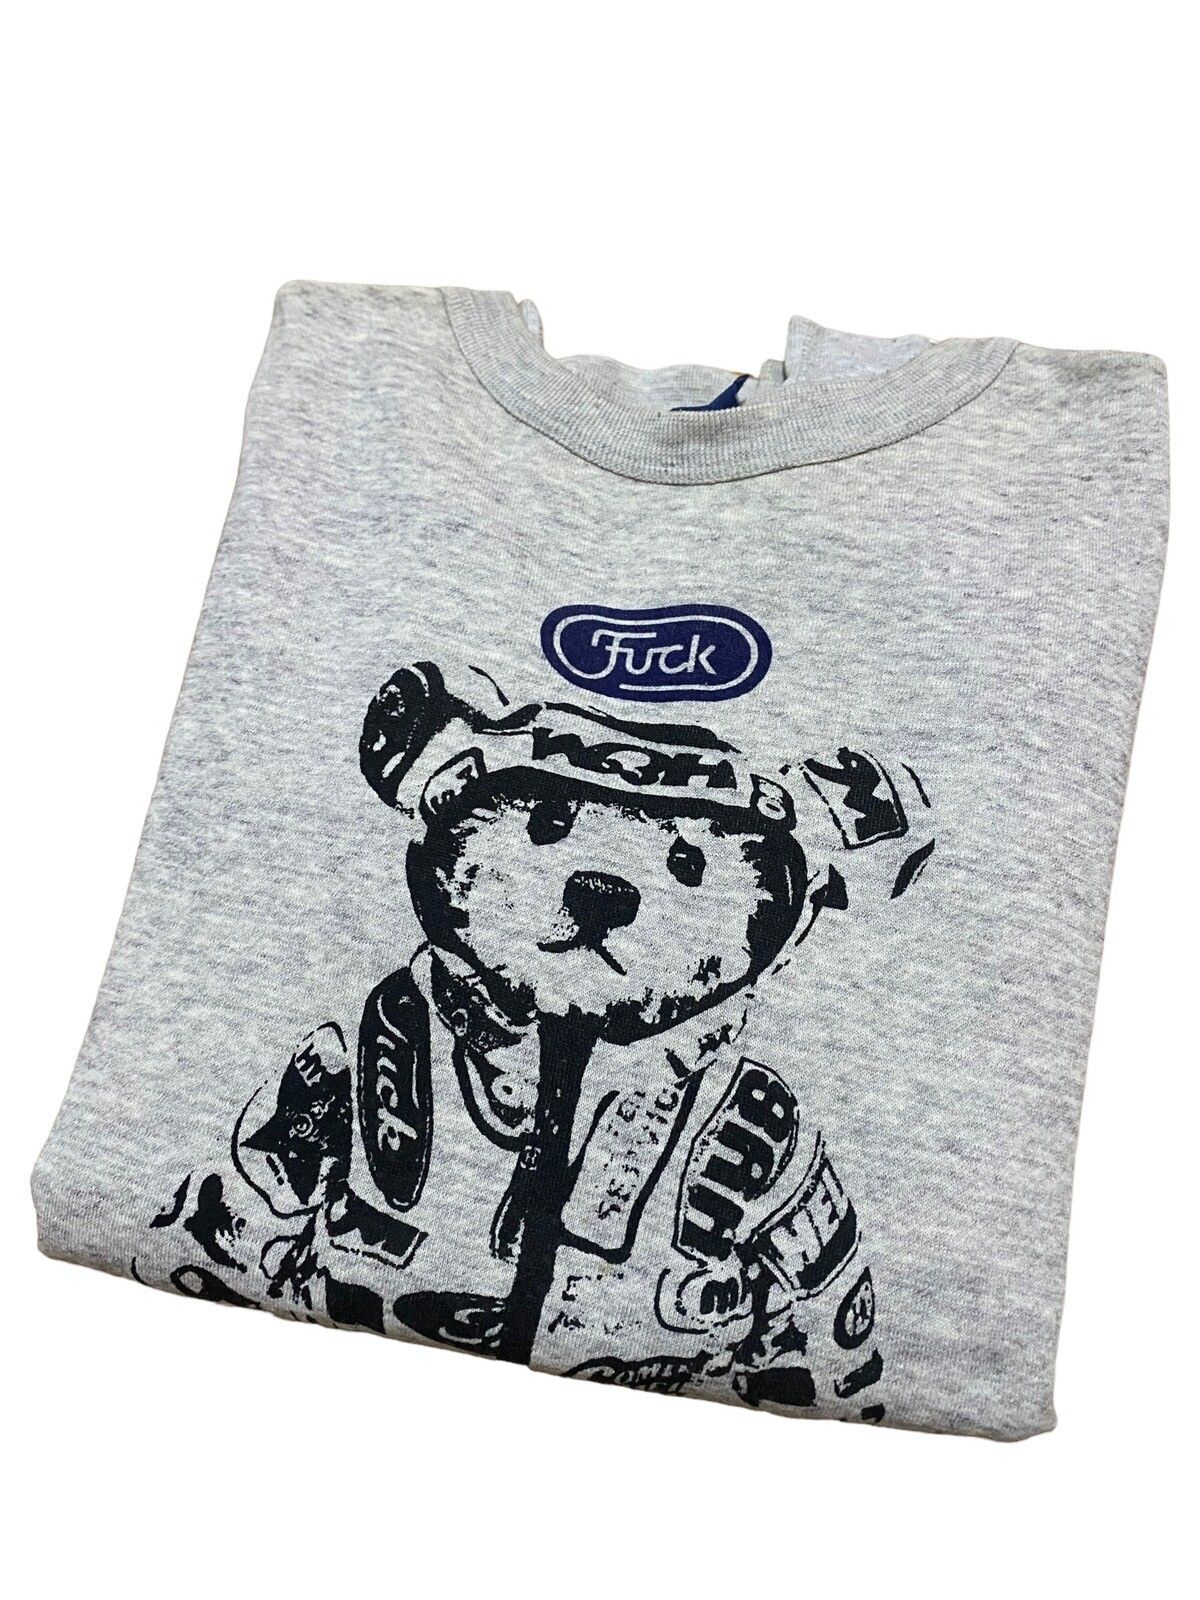 Vintage Vintage Fuck x Hysteric Glamour Bear | Grailed